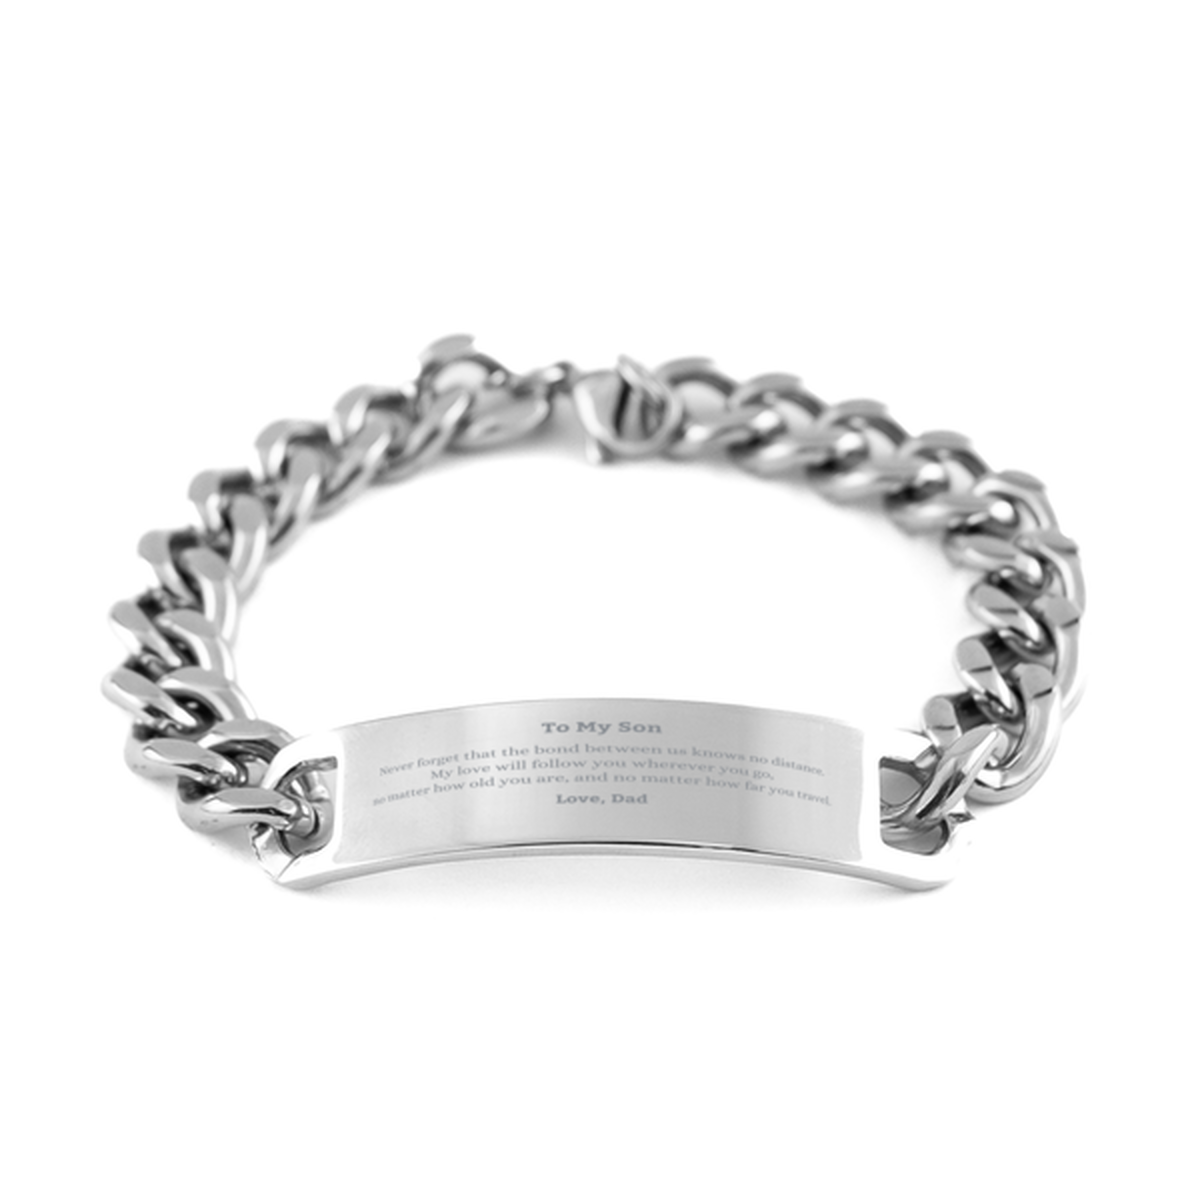 Son Birthday Gifts from Dad, Adjustable Cuban Chain Stainless Steel Bracelet for Son Christmas Graduation Unique Gifts Son Never forget that the bond between us knows no distance. Love, Dad